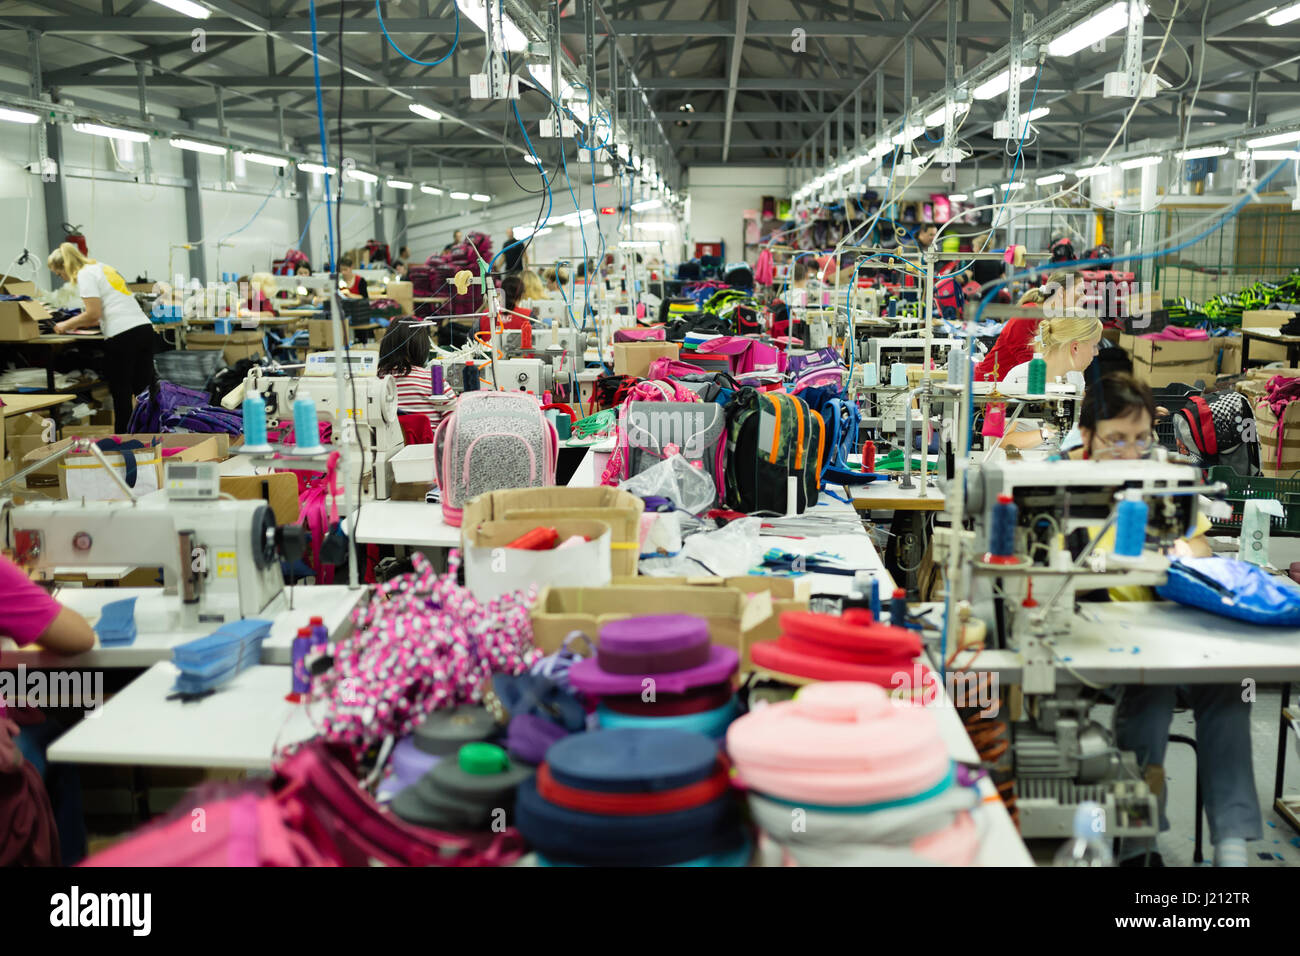 Industrial busy sewing workplace Stock Photo